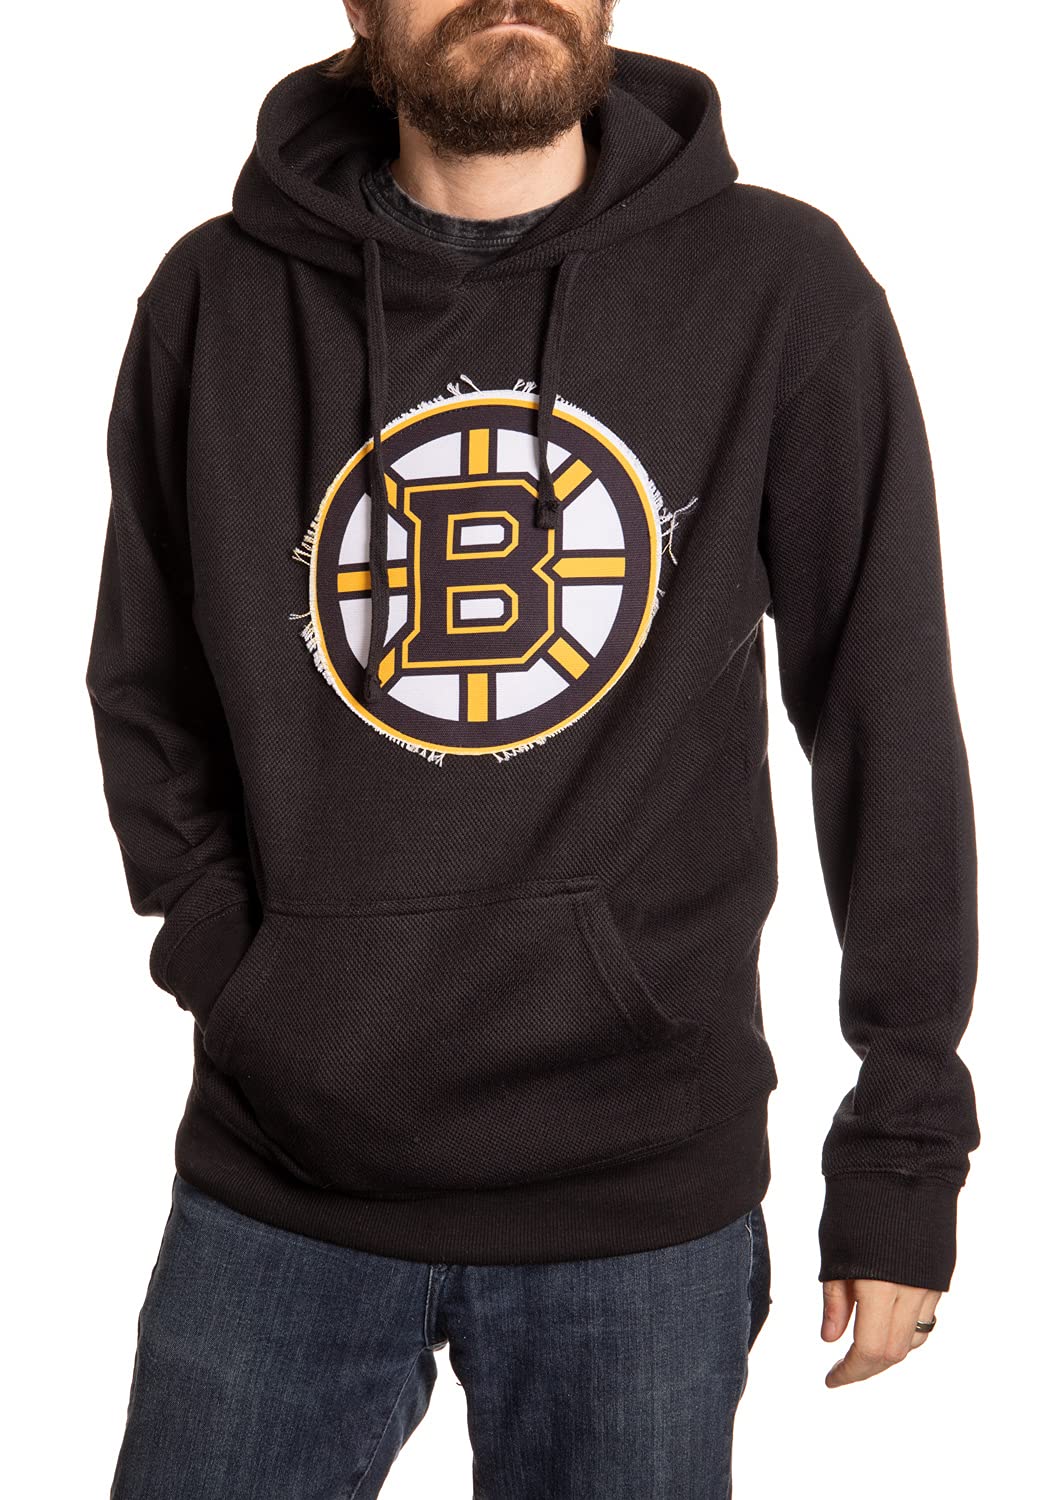 Boston Bruins Waffle Hoodie With Frayed Patch. Classic Logo on Black Sweater